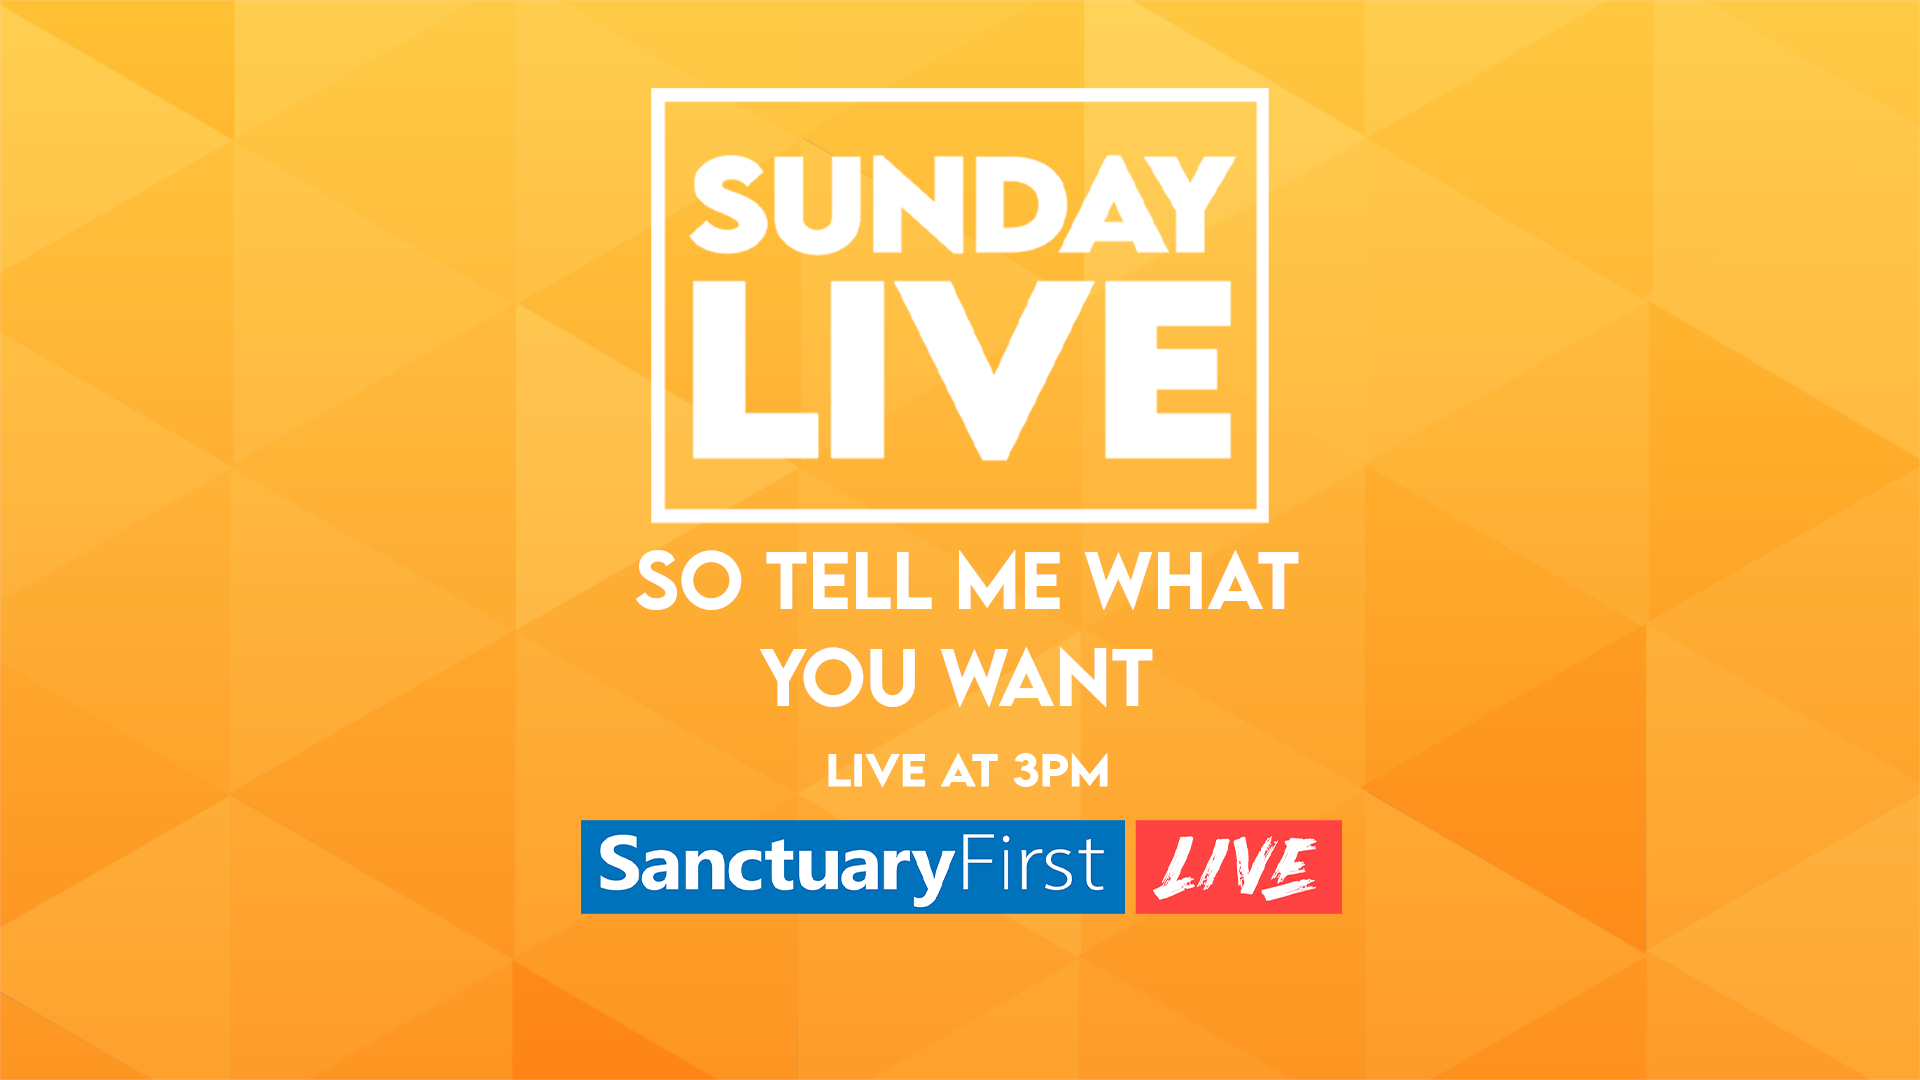 Sunday Live - So tell me what you want